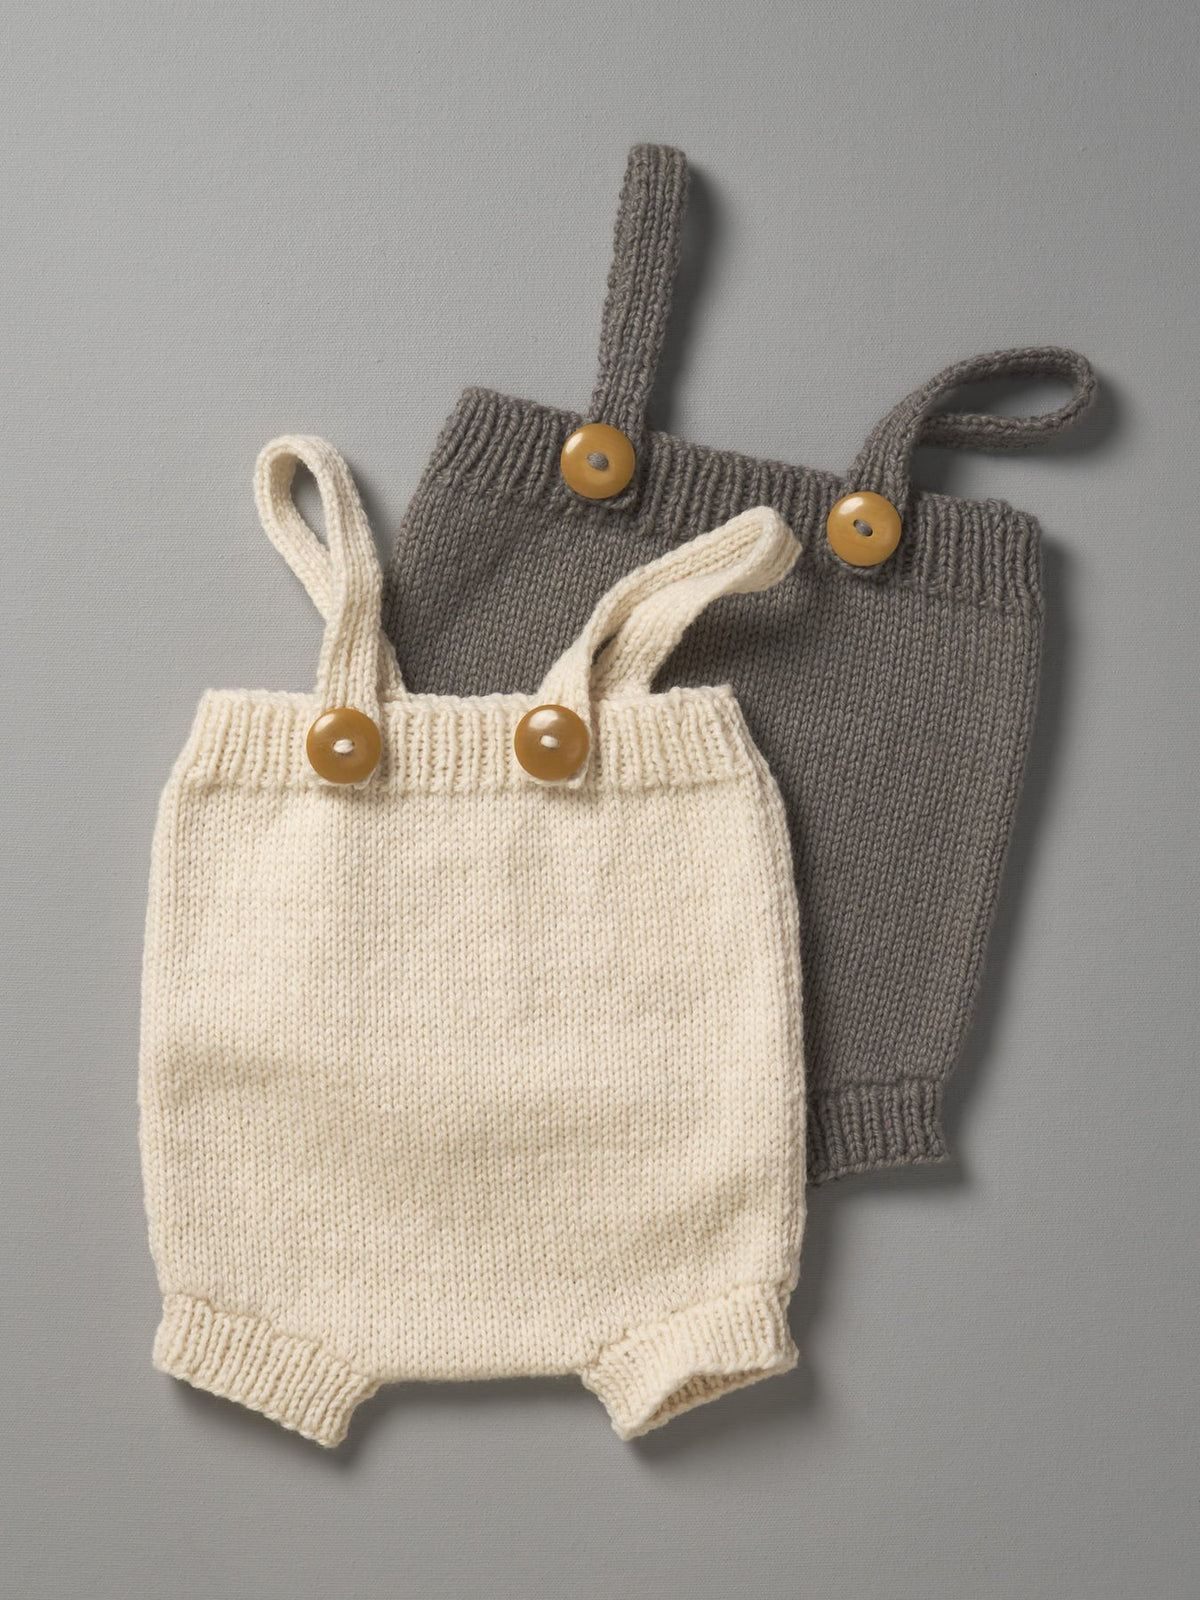 Two Weebits Hand Knitted Rompers - Natural on a grey surface.